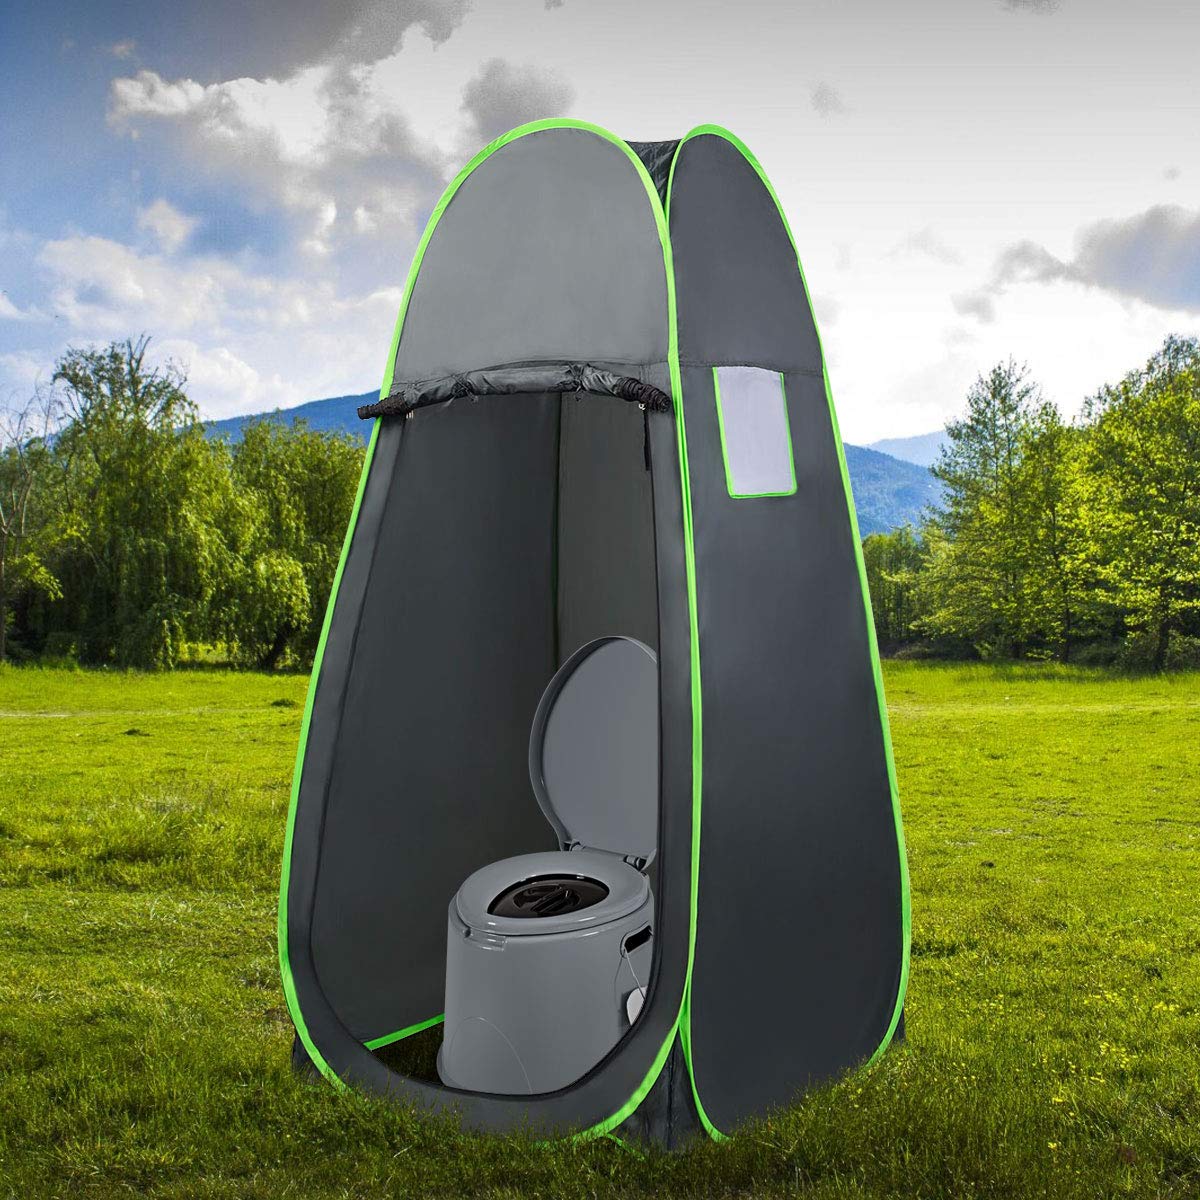 Portable Travel Toilet with Detachable Inner Bucket and Removable Toilet